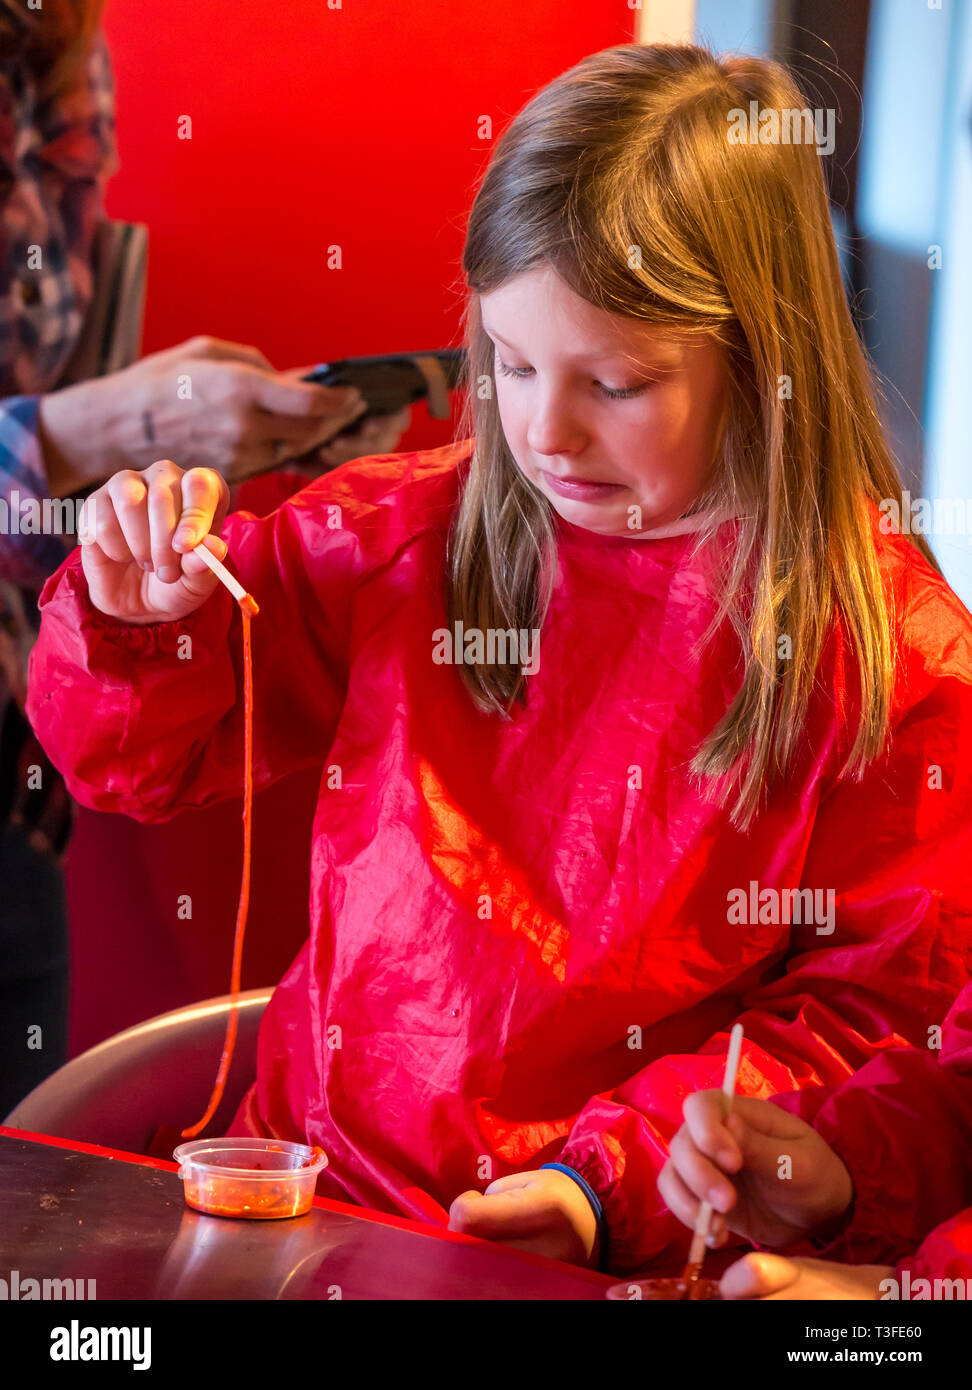 City Arts Centre, Edinburgh, Scotland, United Kingdom, 9 April 2019. Edinburgh Science Festival:  India, age 8 years, has fun learning about blood at the Blood Bar drop in event at the Science Festival Stock Photo